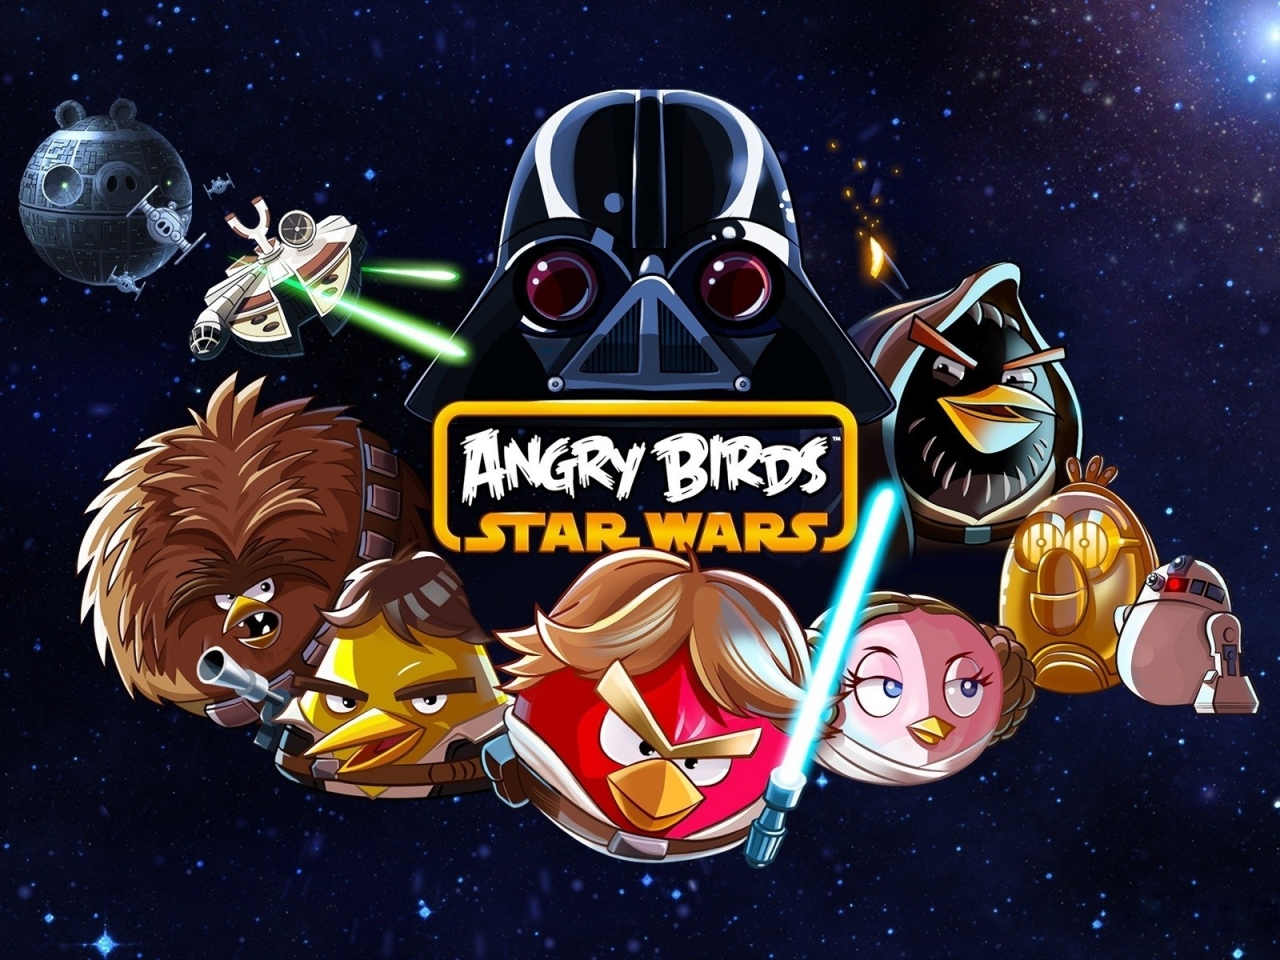 Angry Birds Star Wars for 1280 x 960 resolution